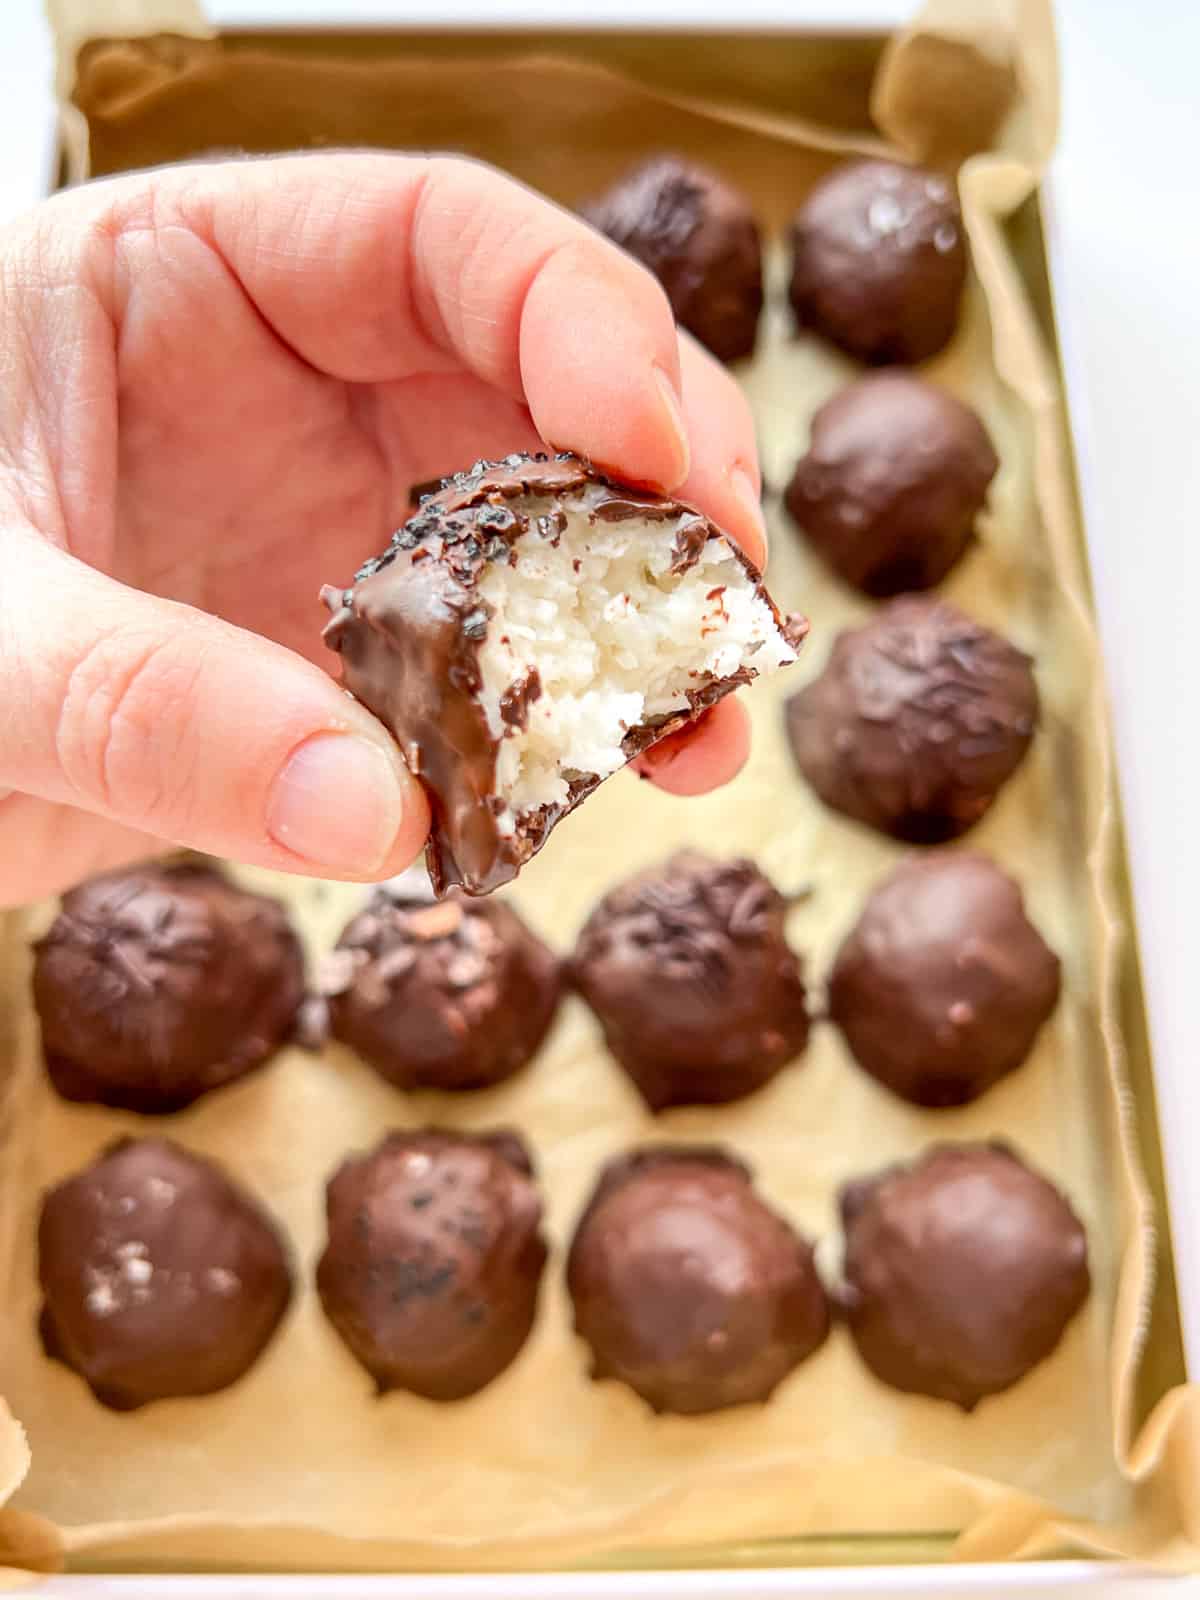 An image showing a hand holding a half eaten Chocolate Coconut Bonbon with the tin filled with more bonbons in the background.